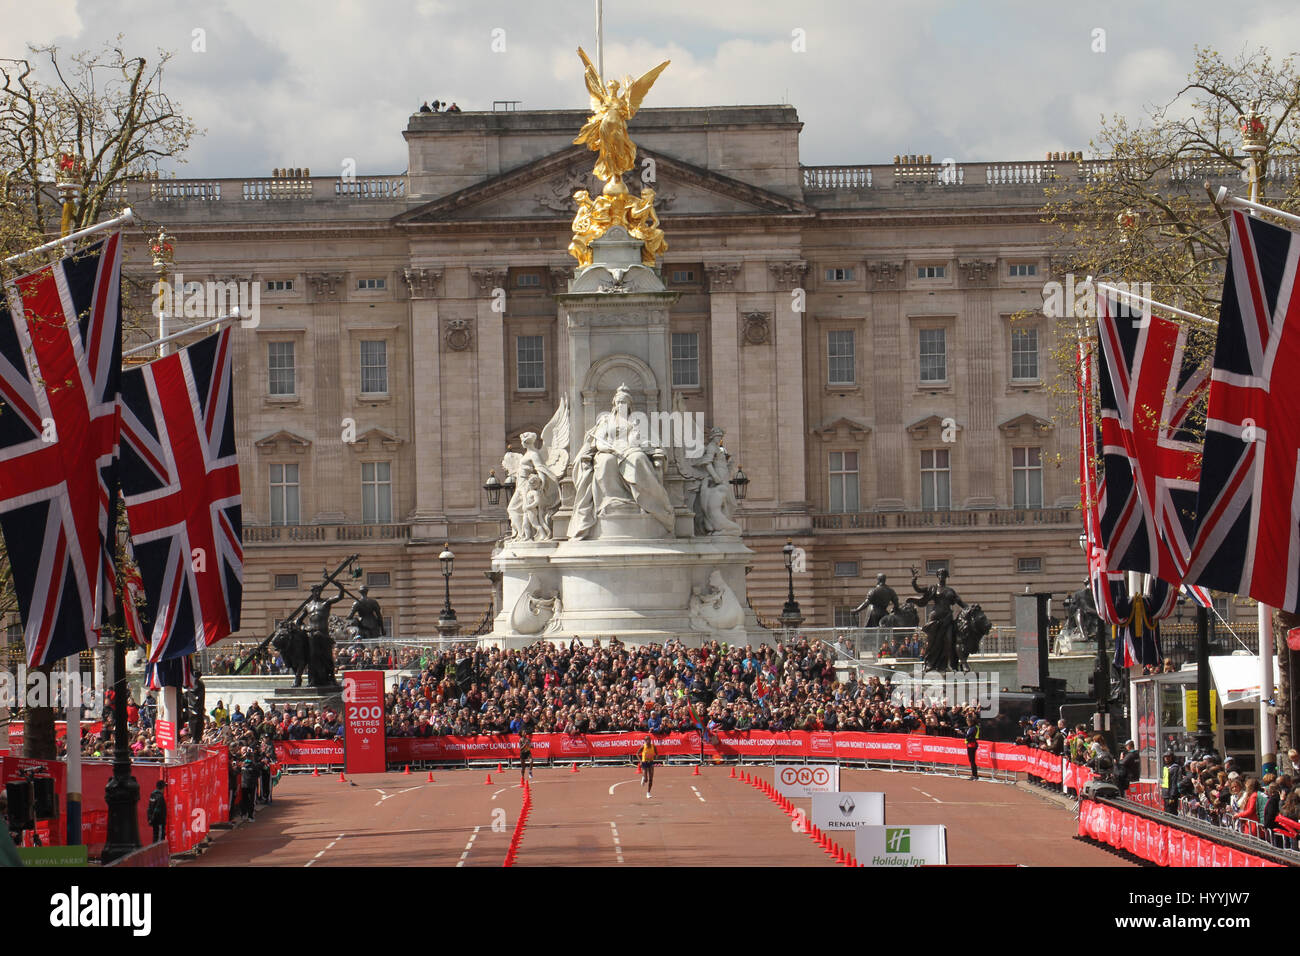 London, UK 24 April 2016. Jemima Sumgong (Kenya) races to the finish line of the Virgin Money London Marathon with the backdrop of Buckingham Palace. The London Marathon’s one-millionth finisher will cross the line during this years race, a milestone in the history of the race that started in 1981. The men's course records is 2:04:29 (2014), held by Wilson Kipsang and women's: 2:15:25 (2003) held by Paula Radcliffe. © David Mbiyu/Alamy Live News Stock Photo